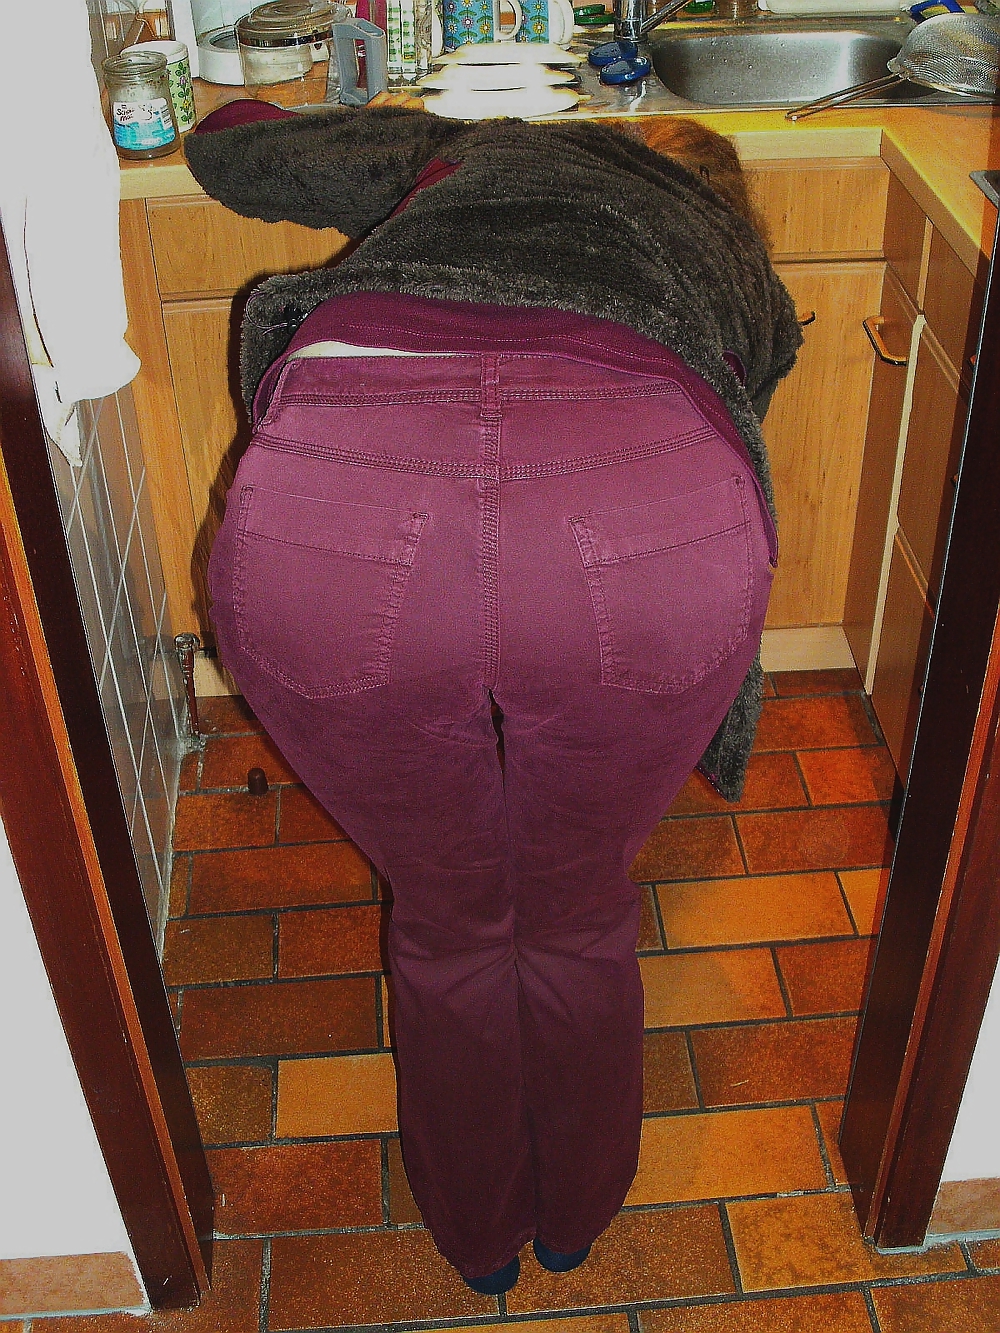 Big firm mature ass in jeans #22593363